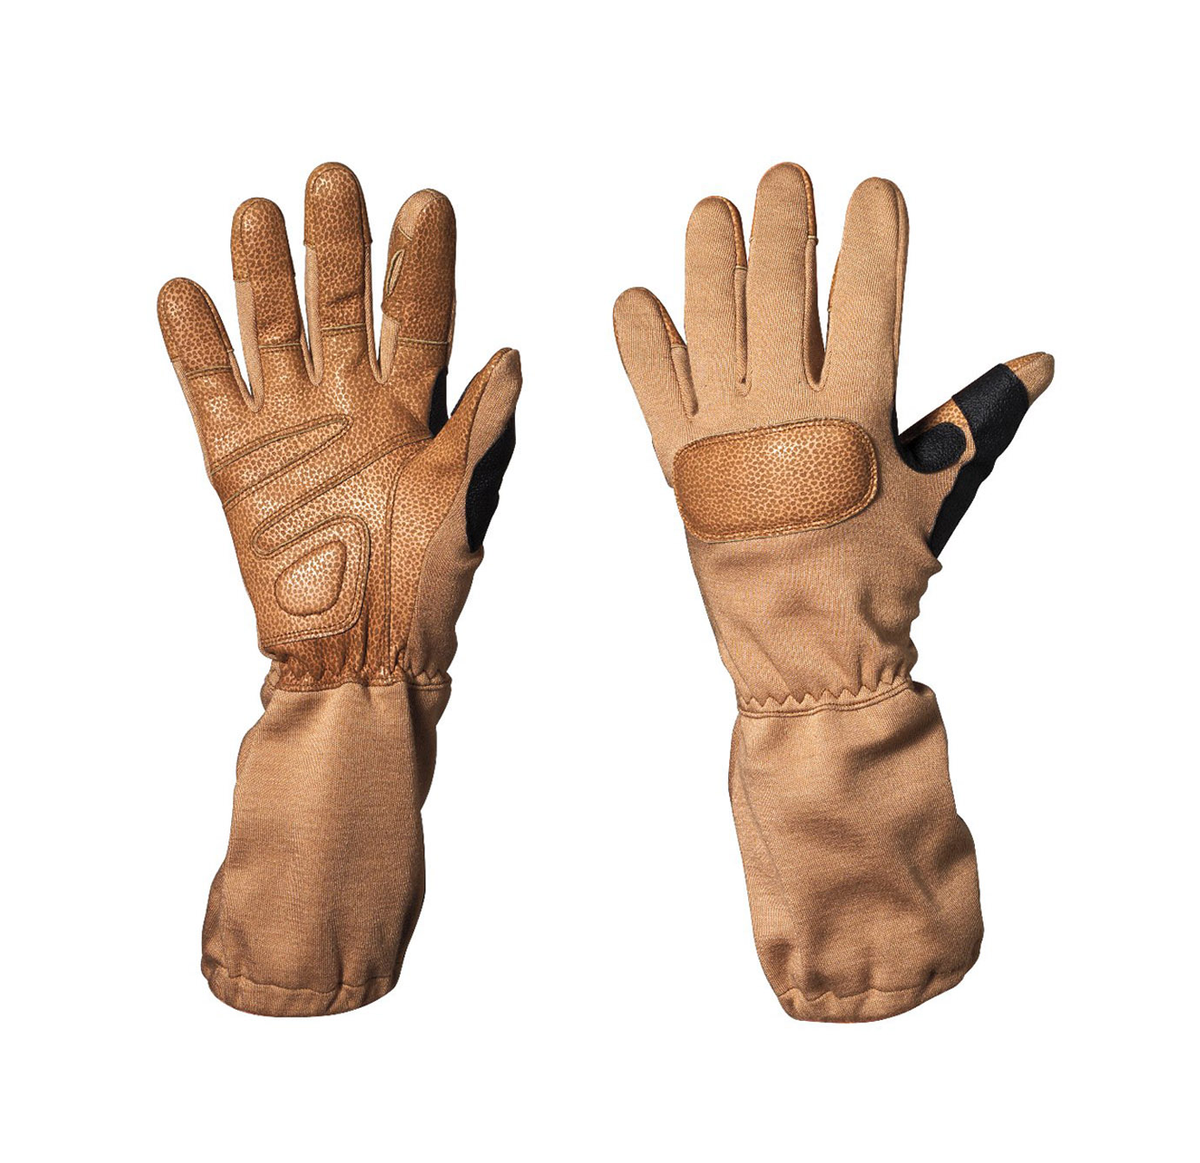 CLEARANCE - Rothco Special Forces Cut Resistant Tactical Gloves - SAND